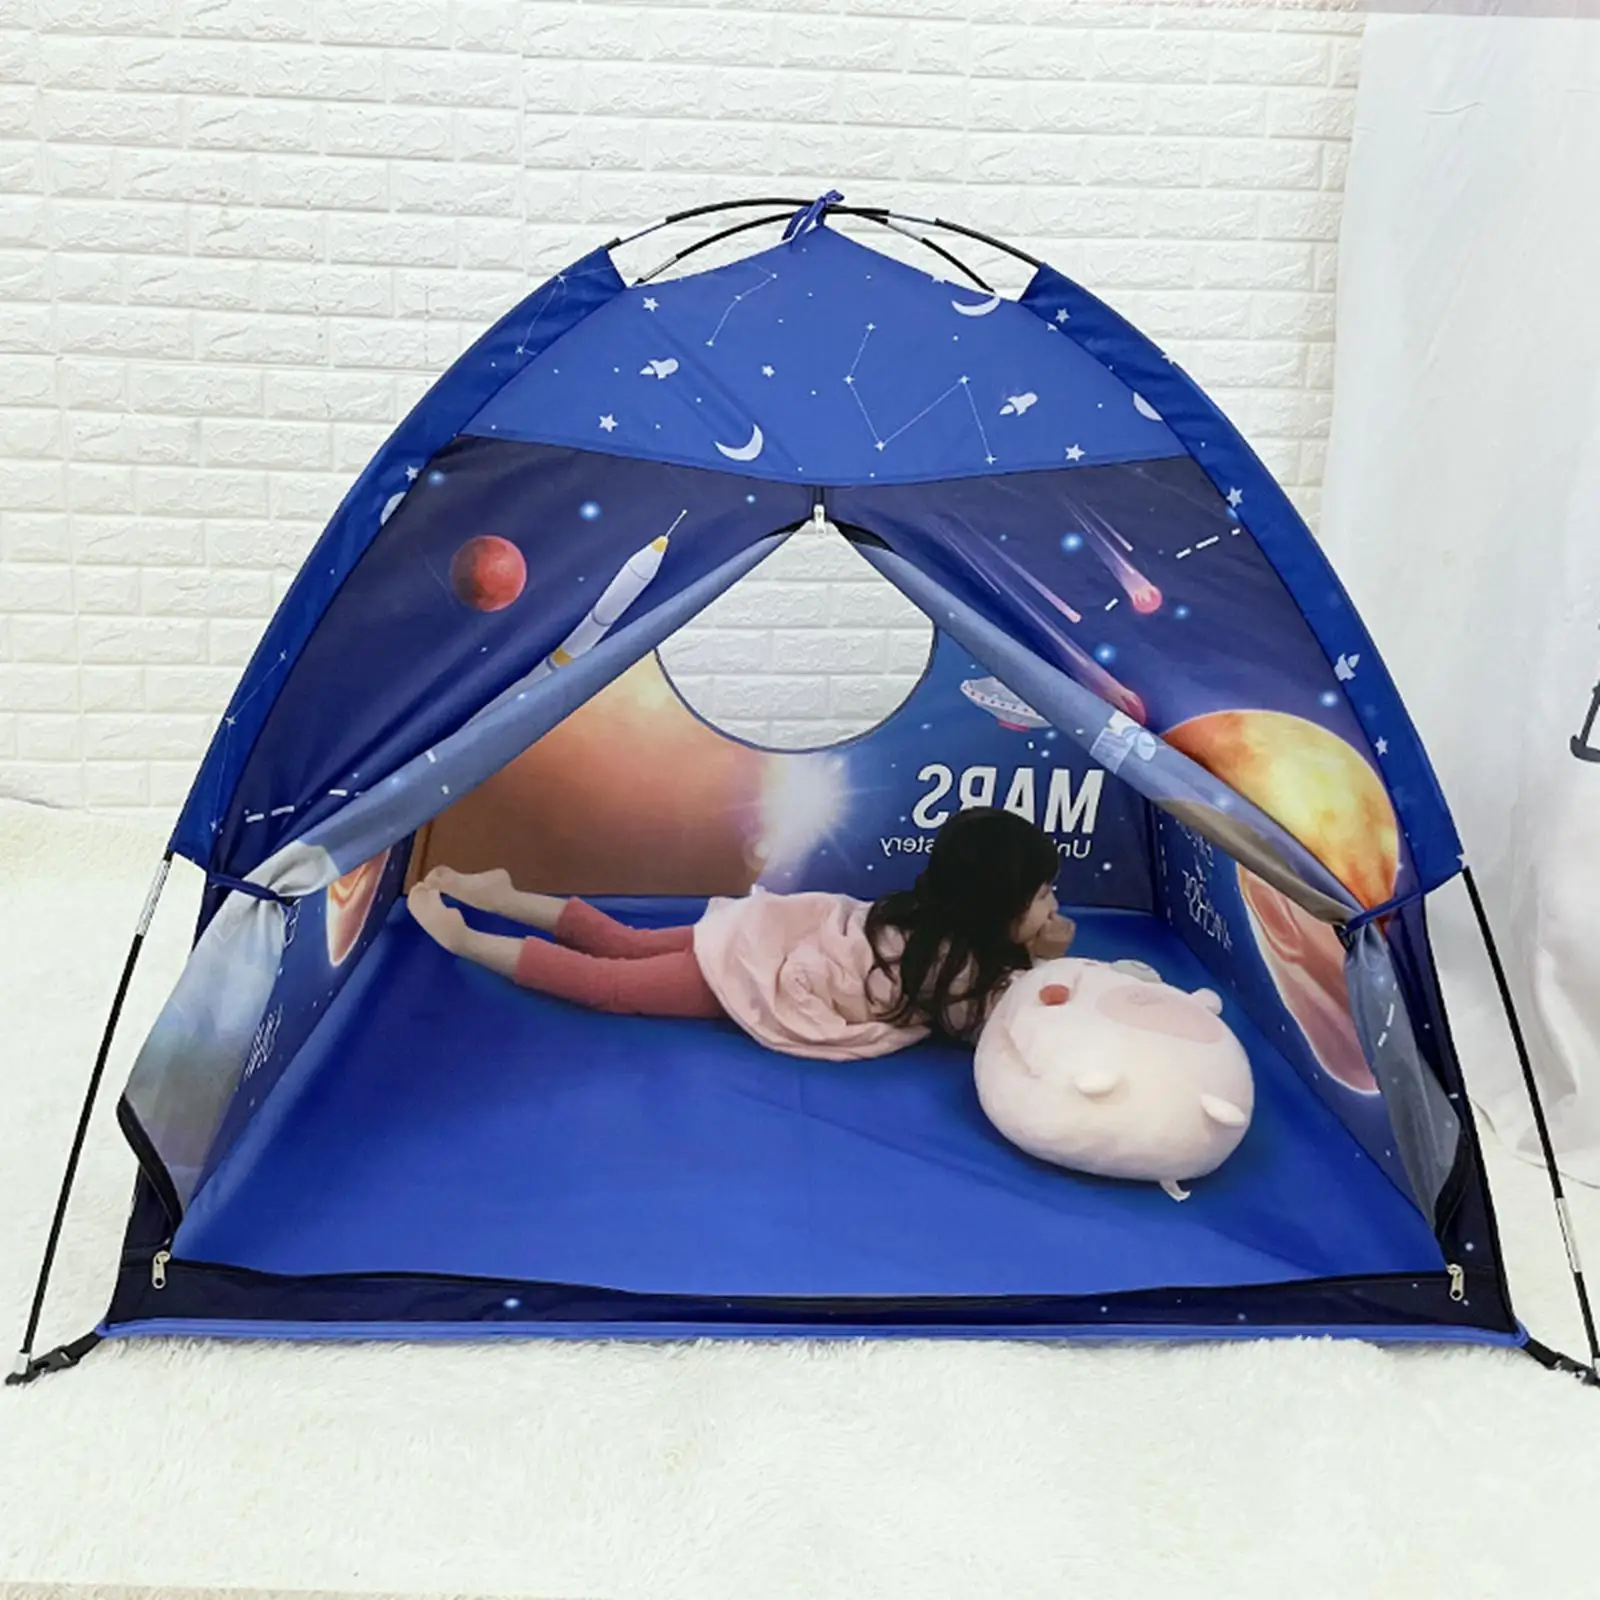 Play Tent Camping Playground Foldable Child Room Decor Indoor and Outdoor Play Tent for Boys Kids Toddlers Children Girls